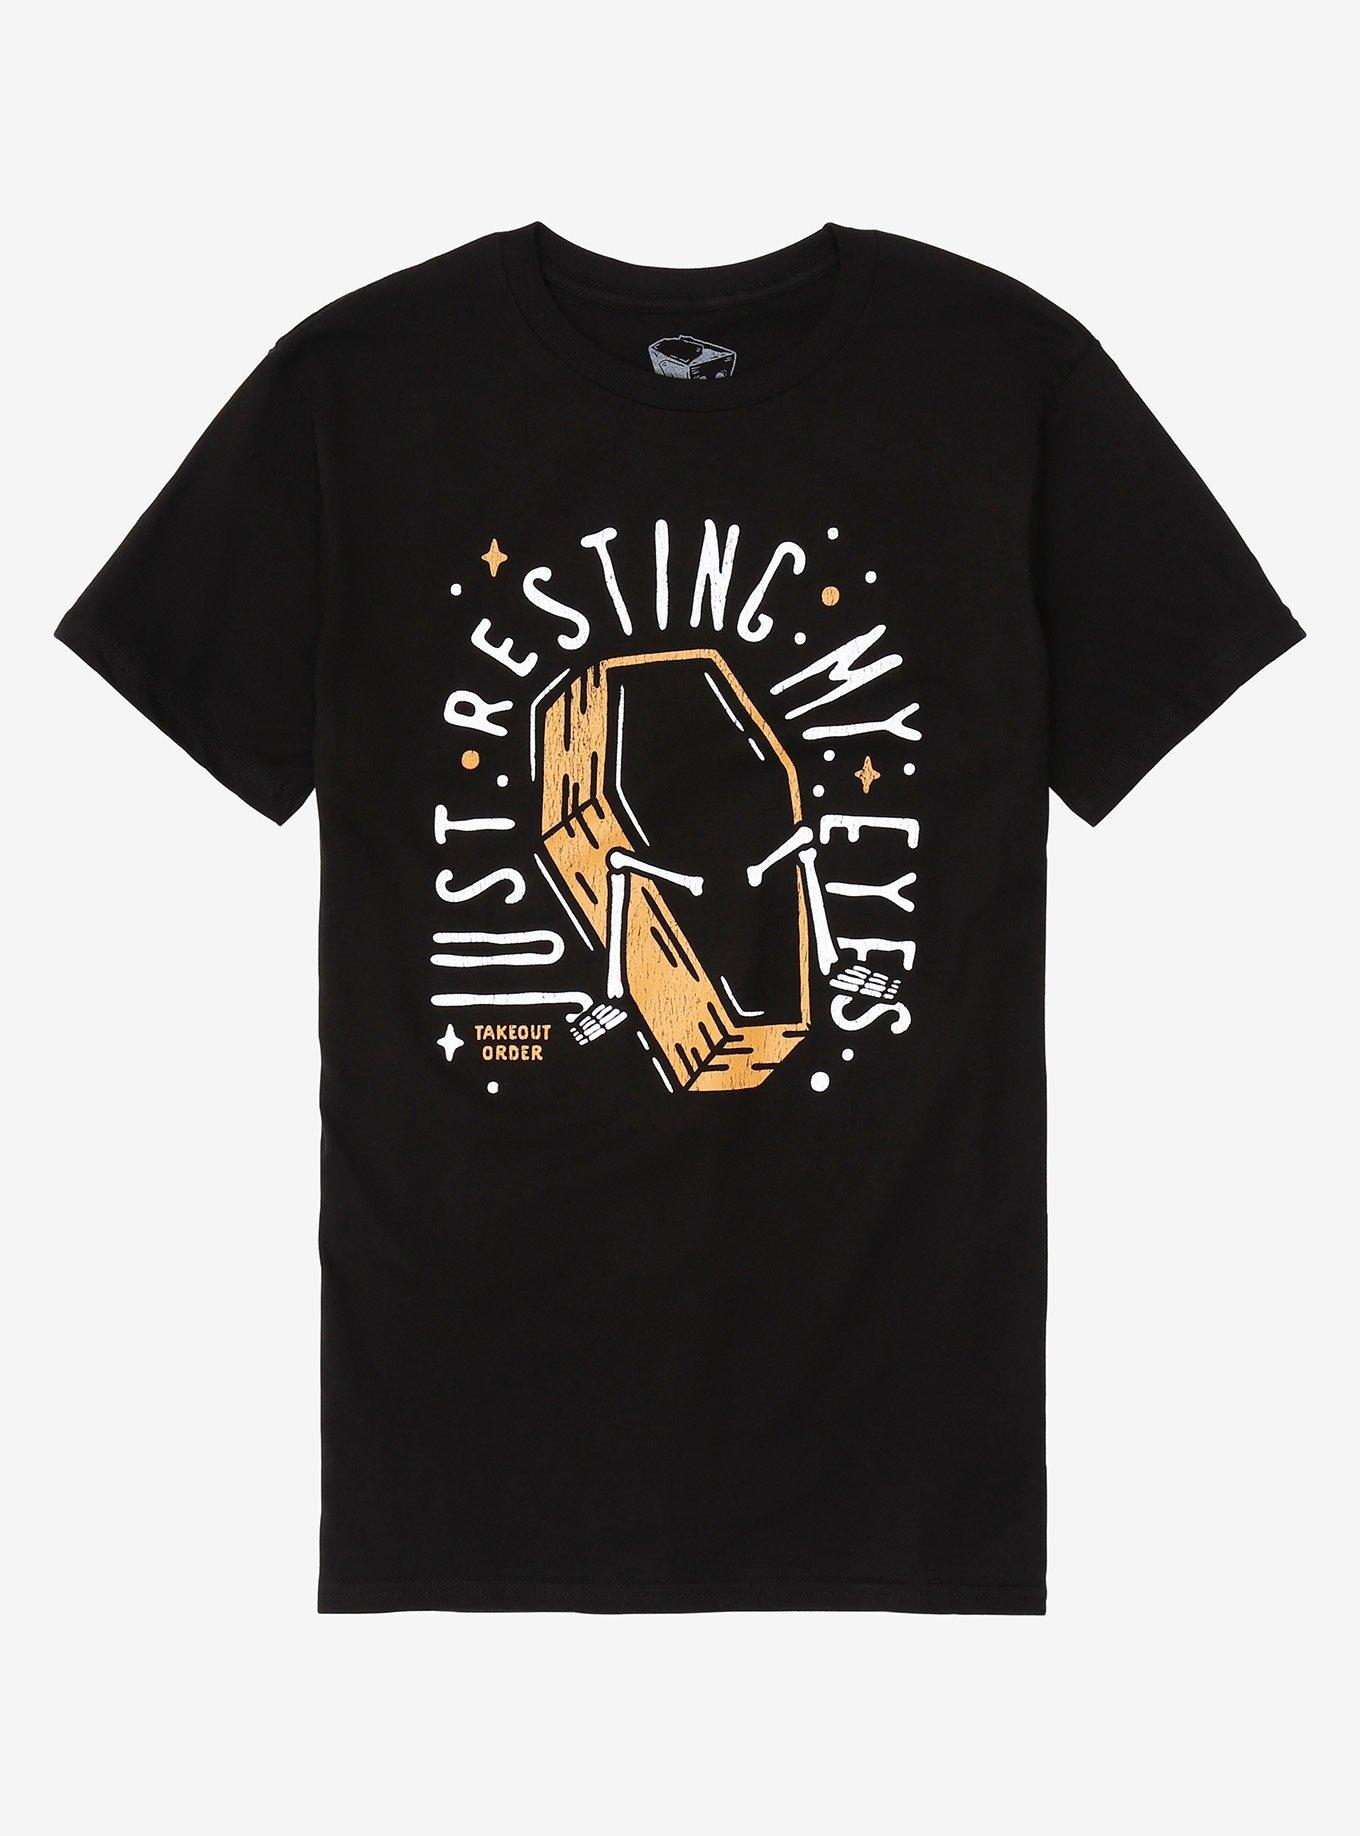 Just Resting My Eyes T-Shirt By Takeout Order, MULTI, hi-res